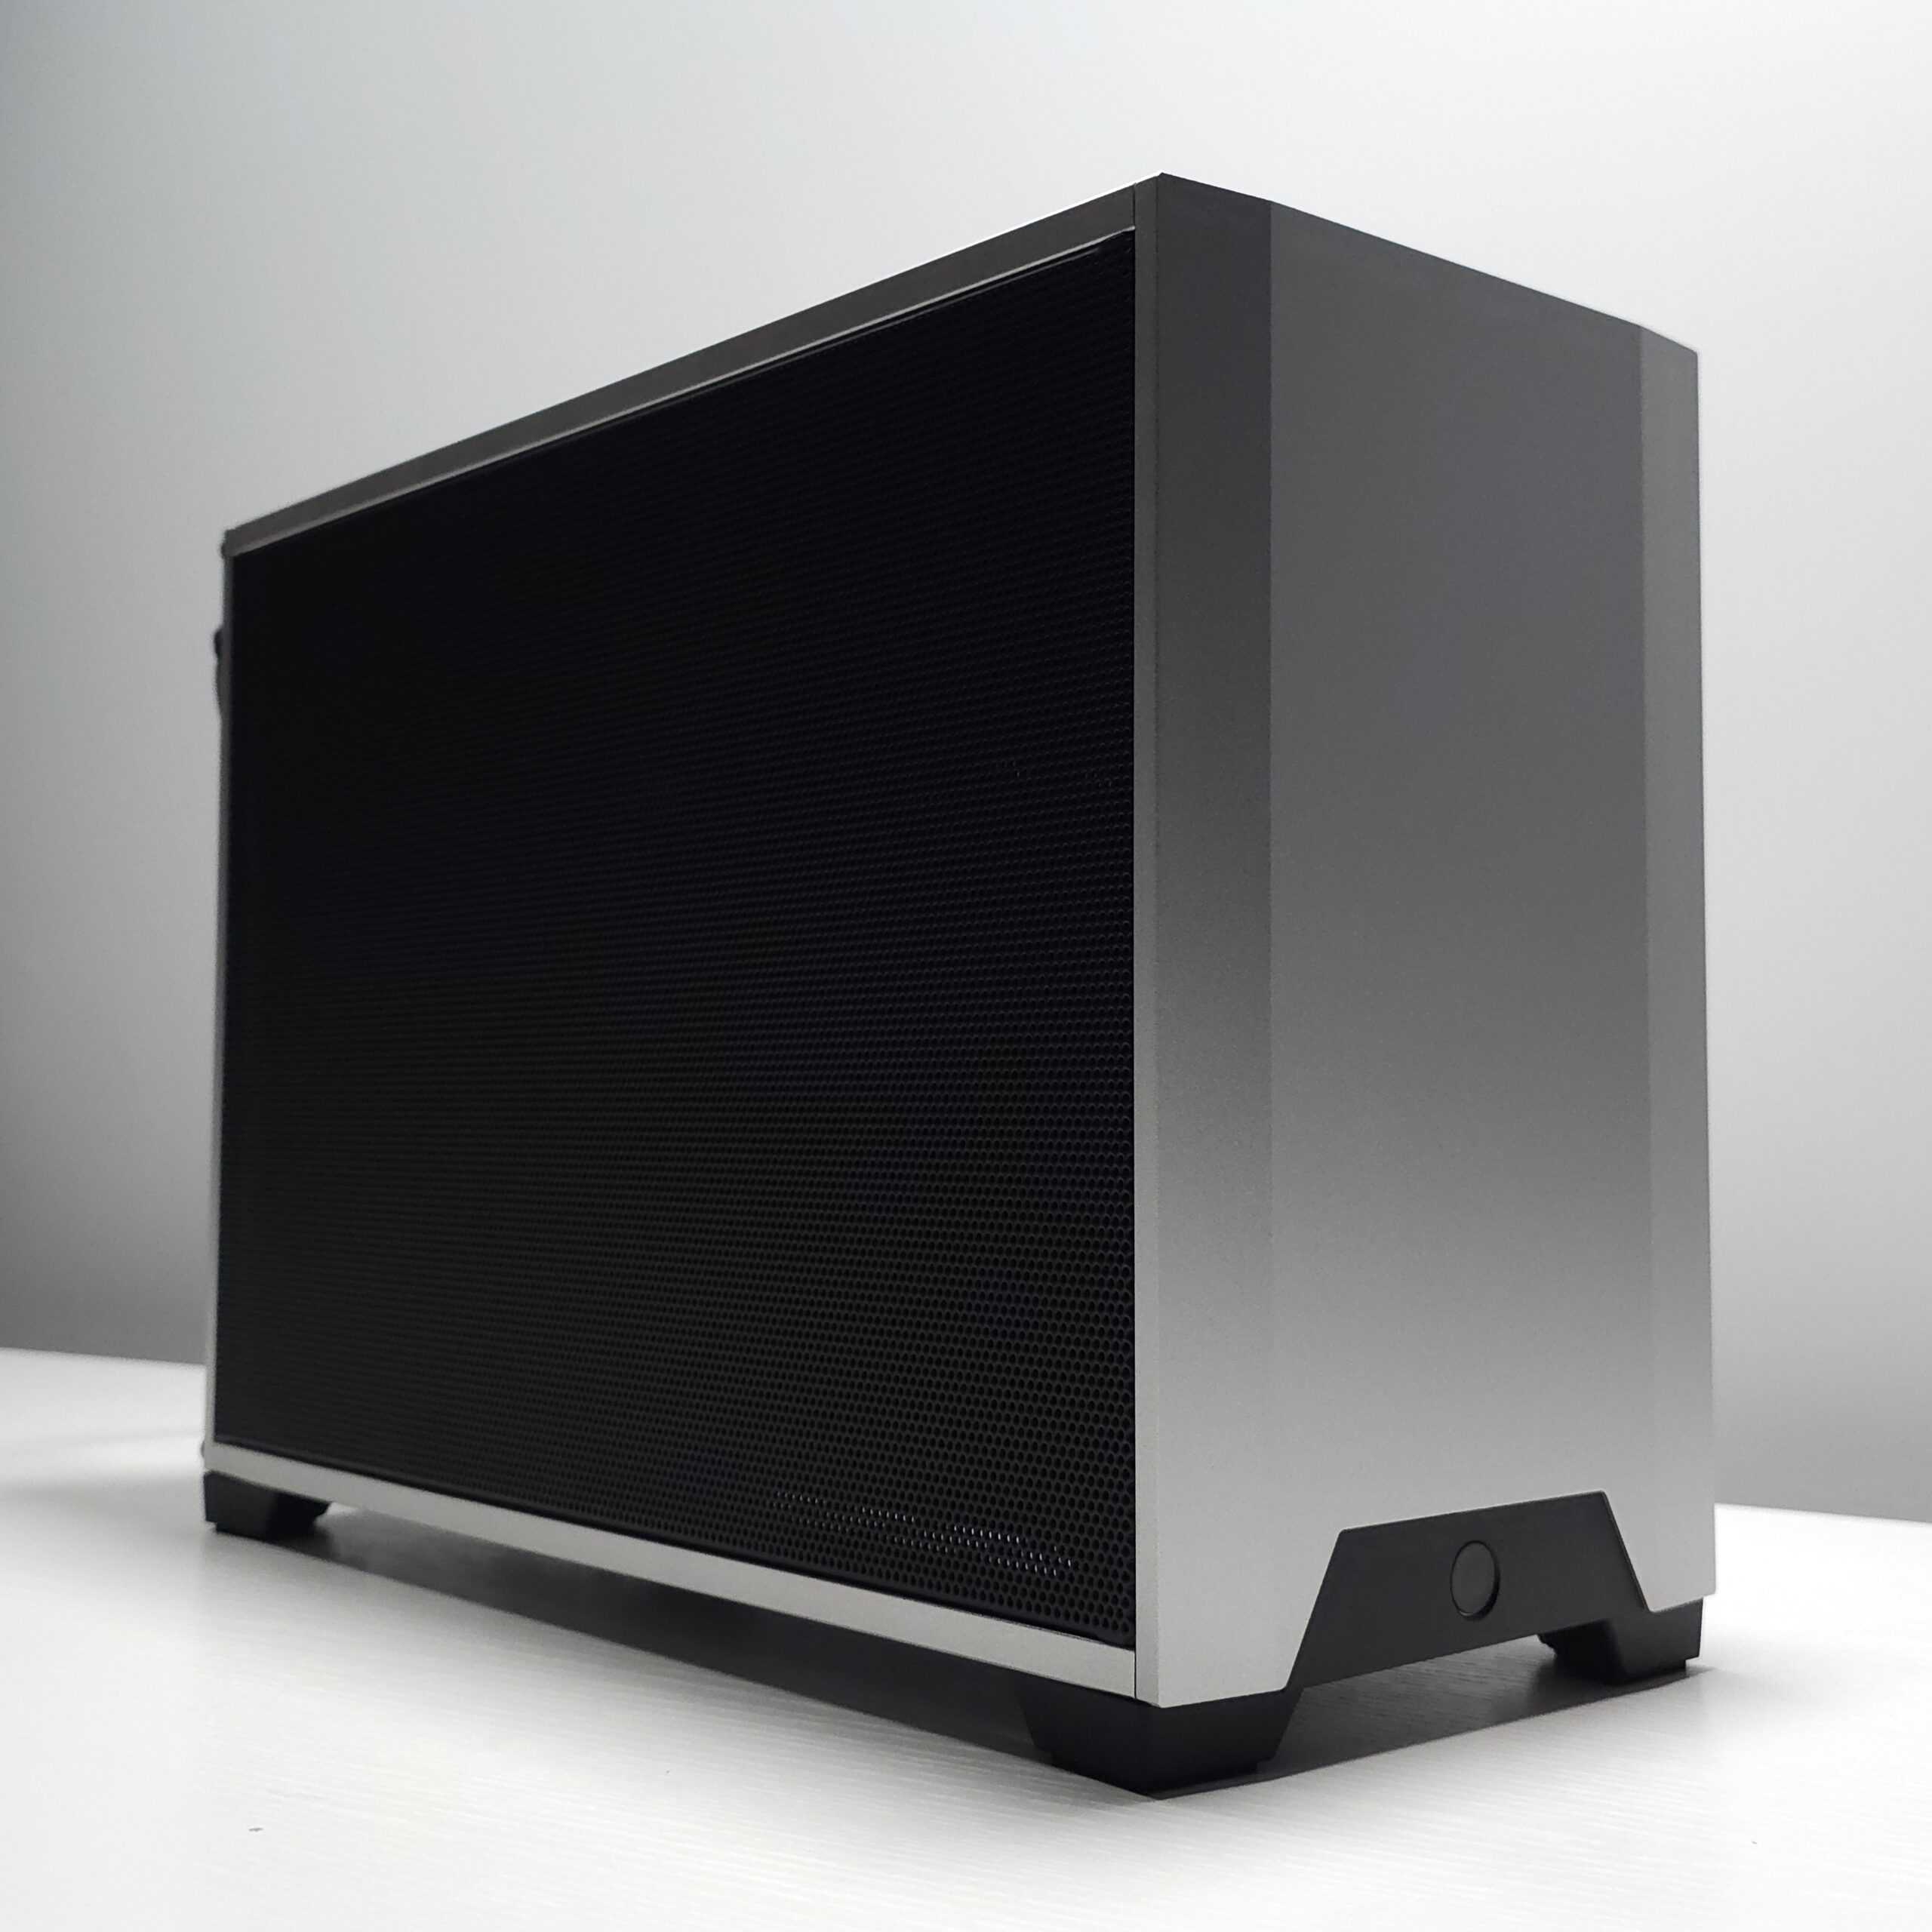 Featured image for “NCASE M1EVO”